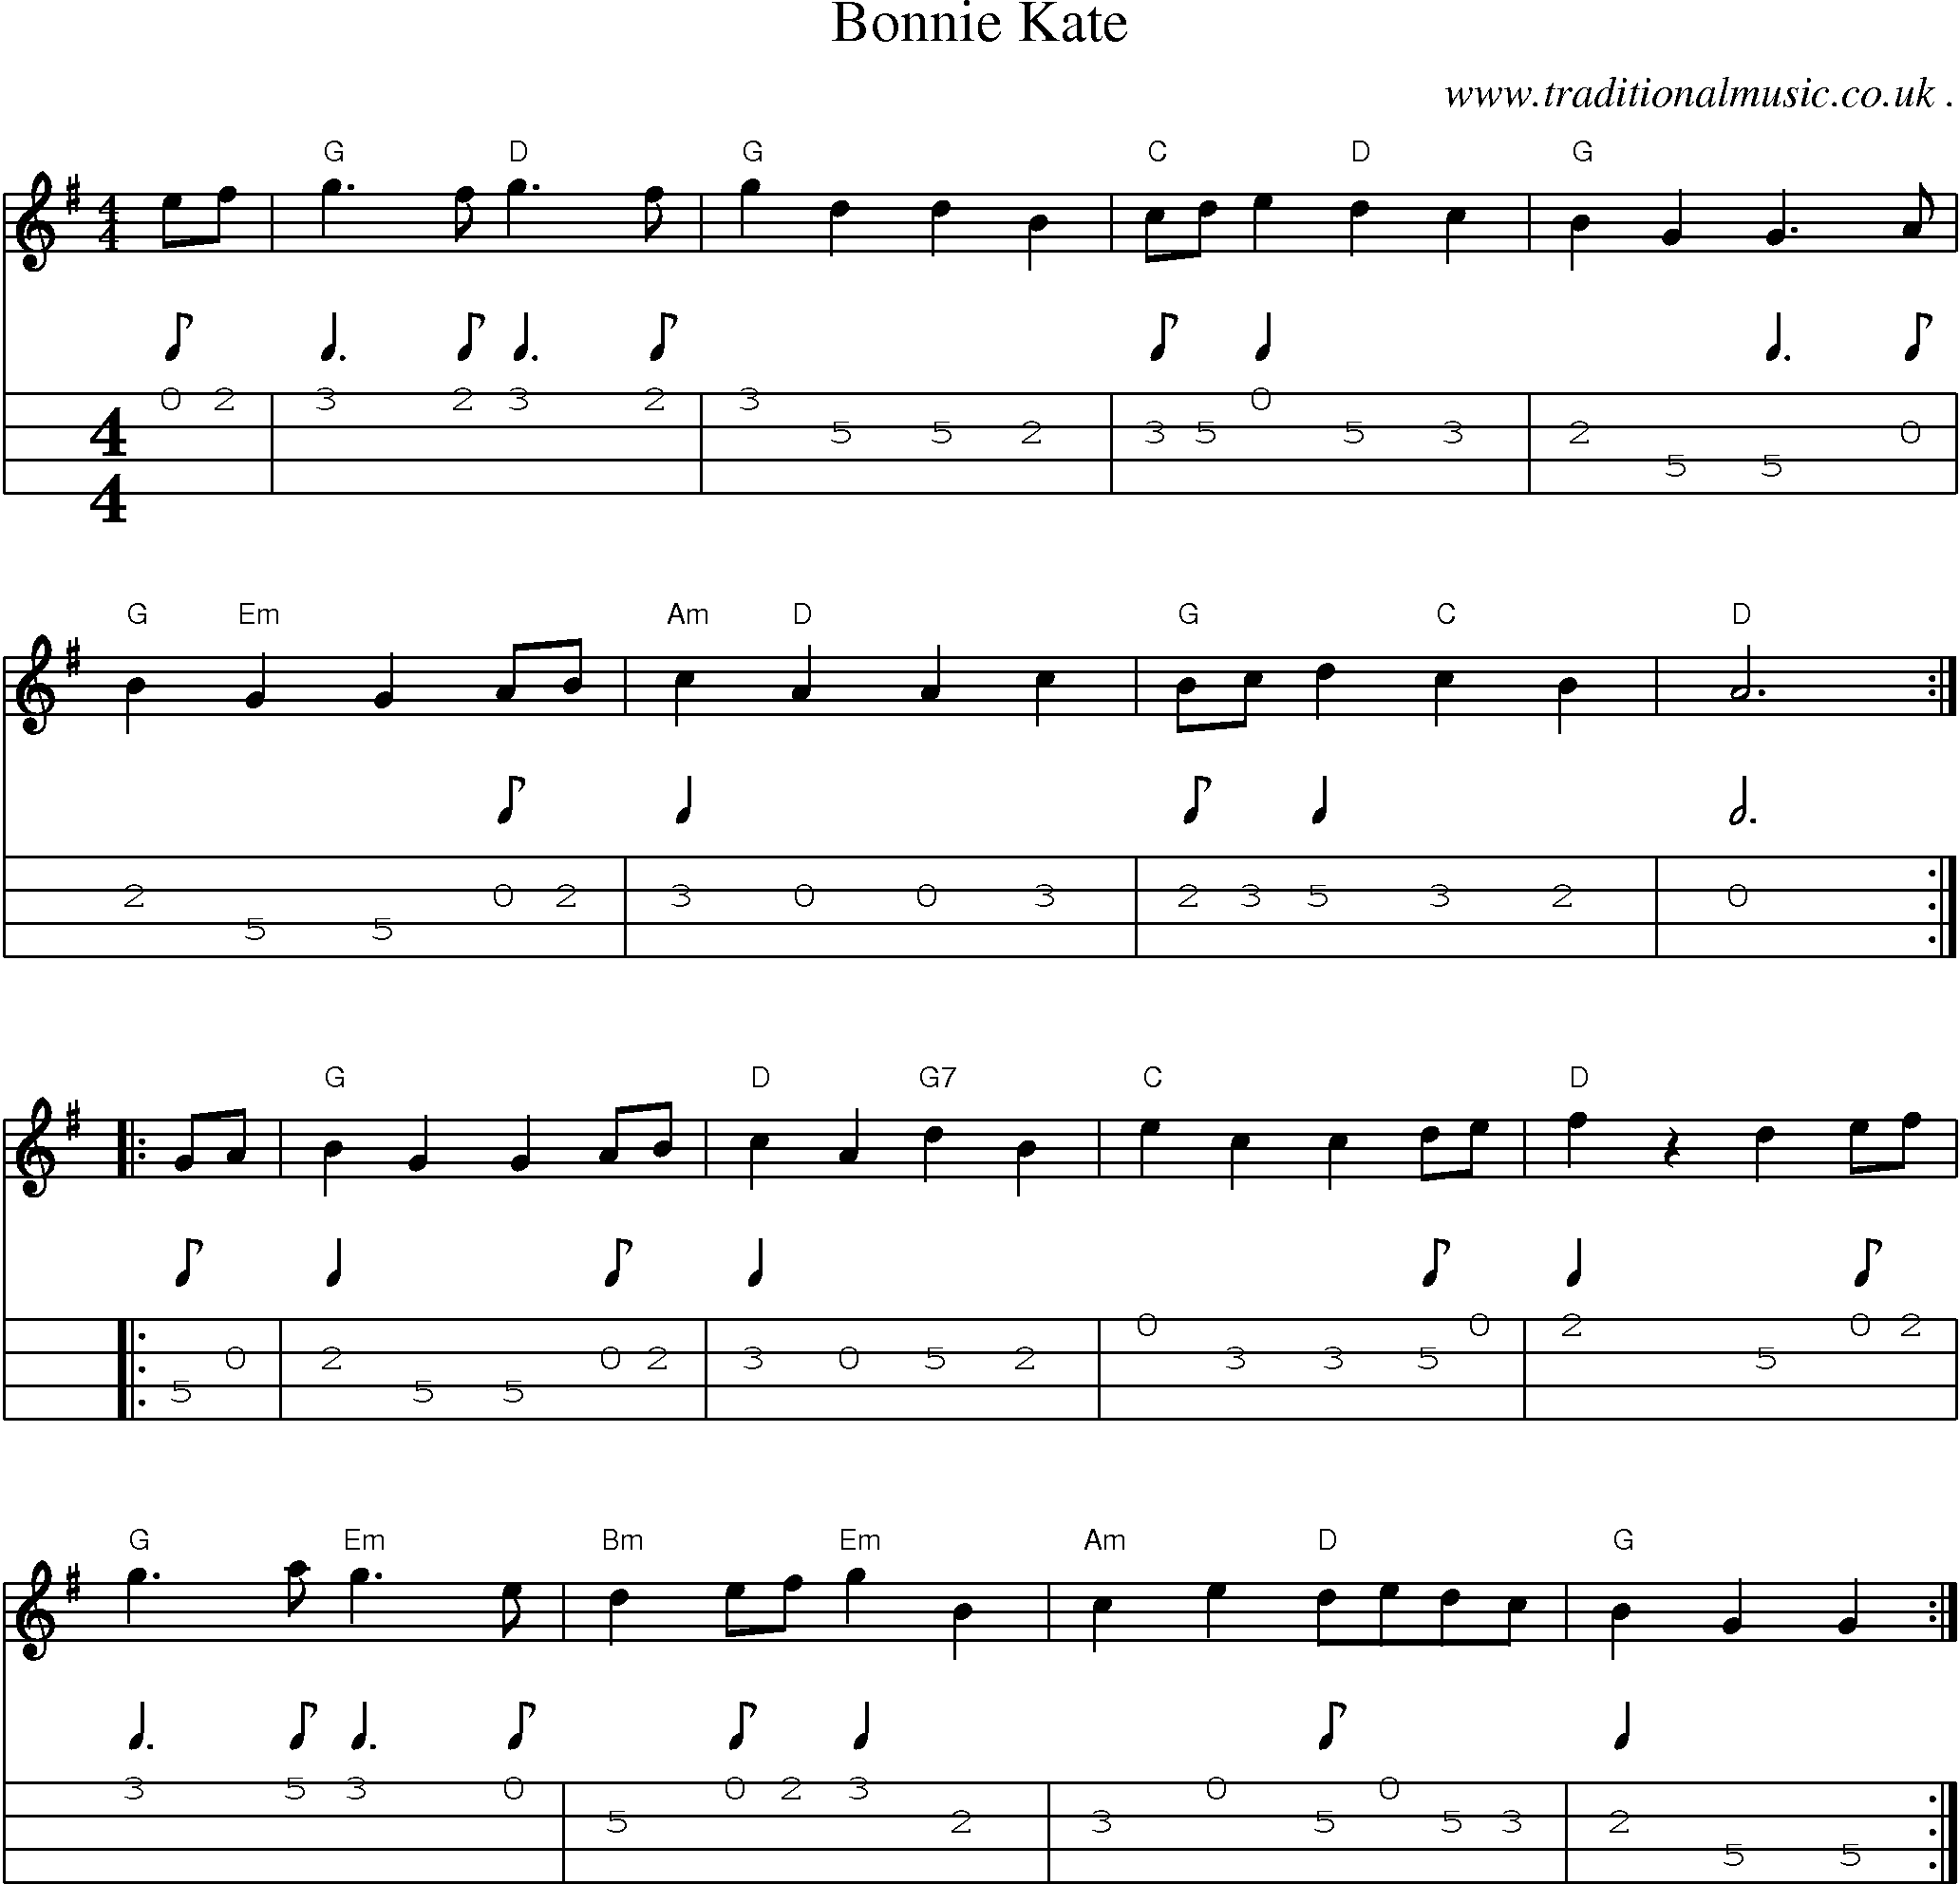 Music Score and Guitar Tabs for Bonnie Kate